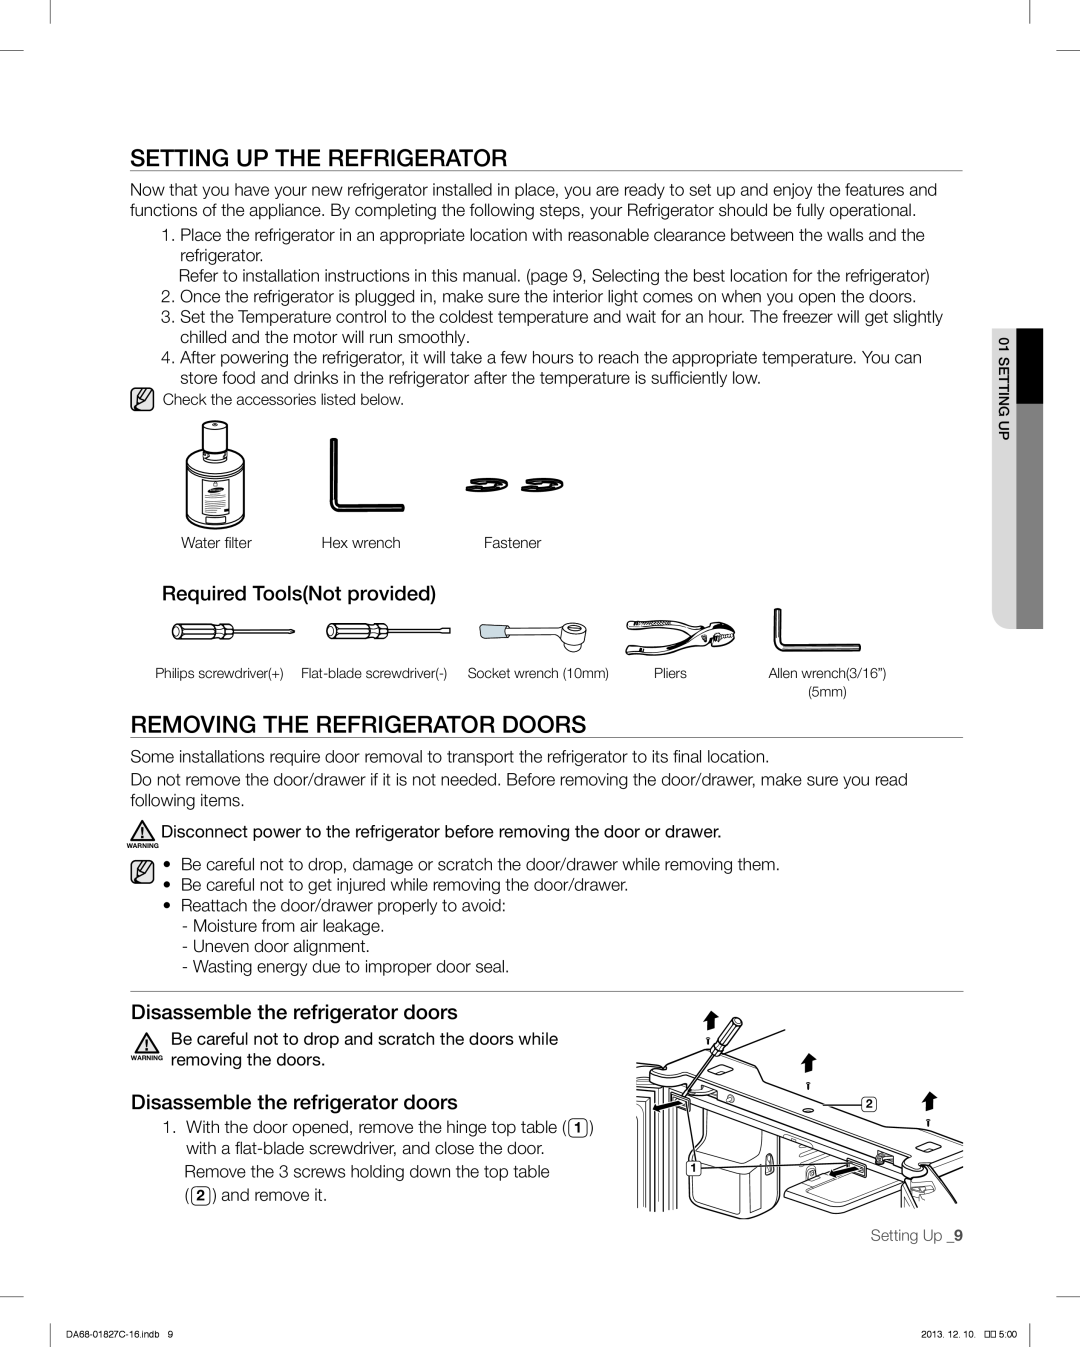 Samsung RFG237AARS user manual Setting Up The Refrigerator, Removing The Refrigerator Doors, Required ToolsNot provided 